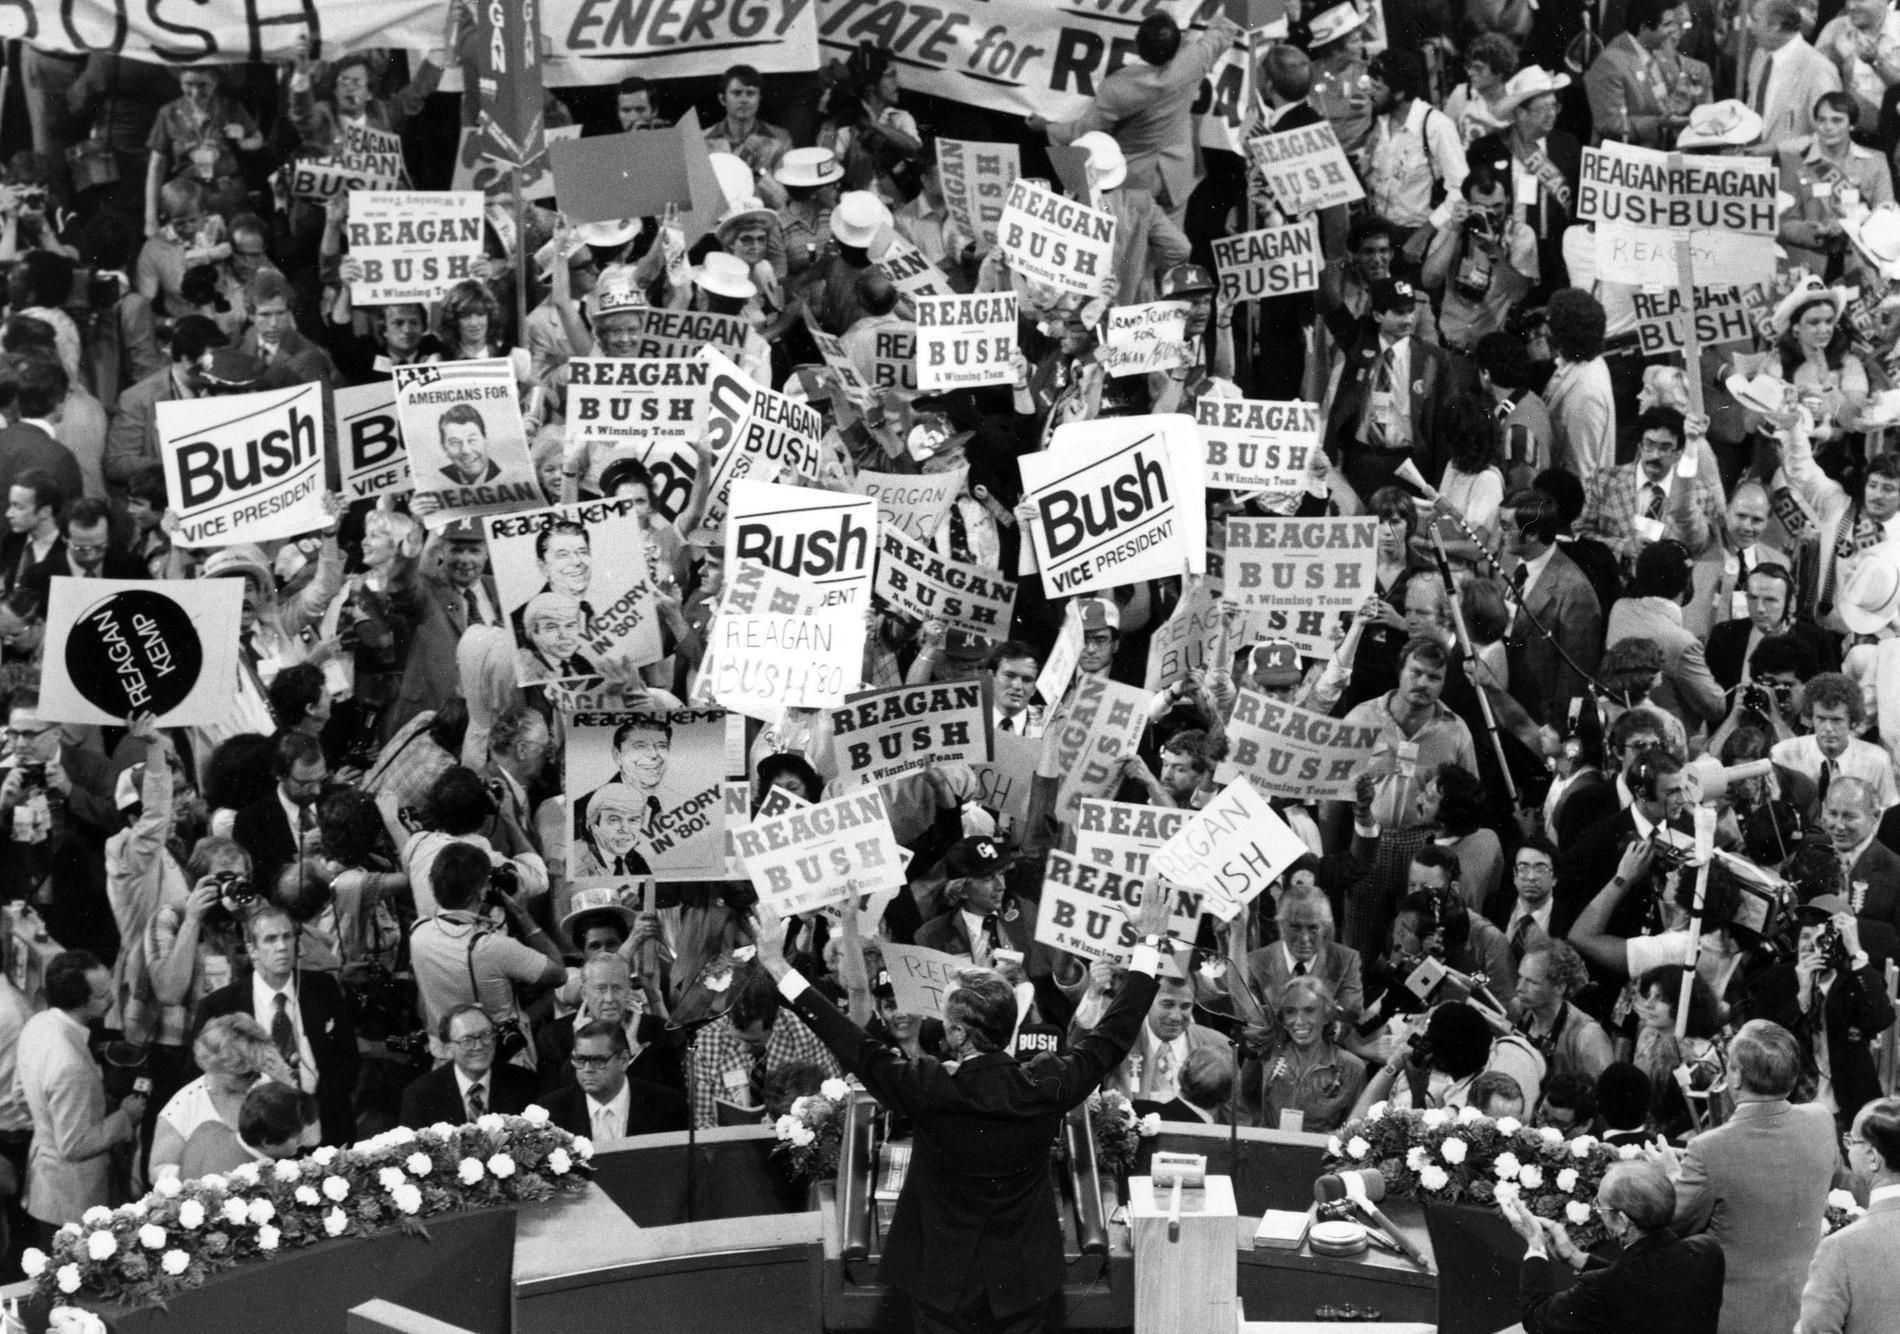 In this July 16, 1980 file photo George H.W. Bush, center foreground, acknowledges the crowd before speaking to the Republican Convention delegates in Detroit, Mich.